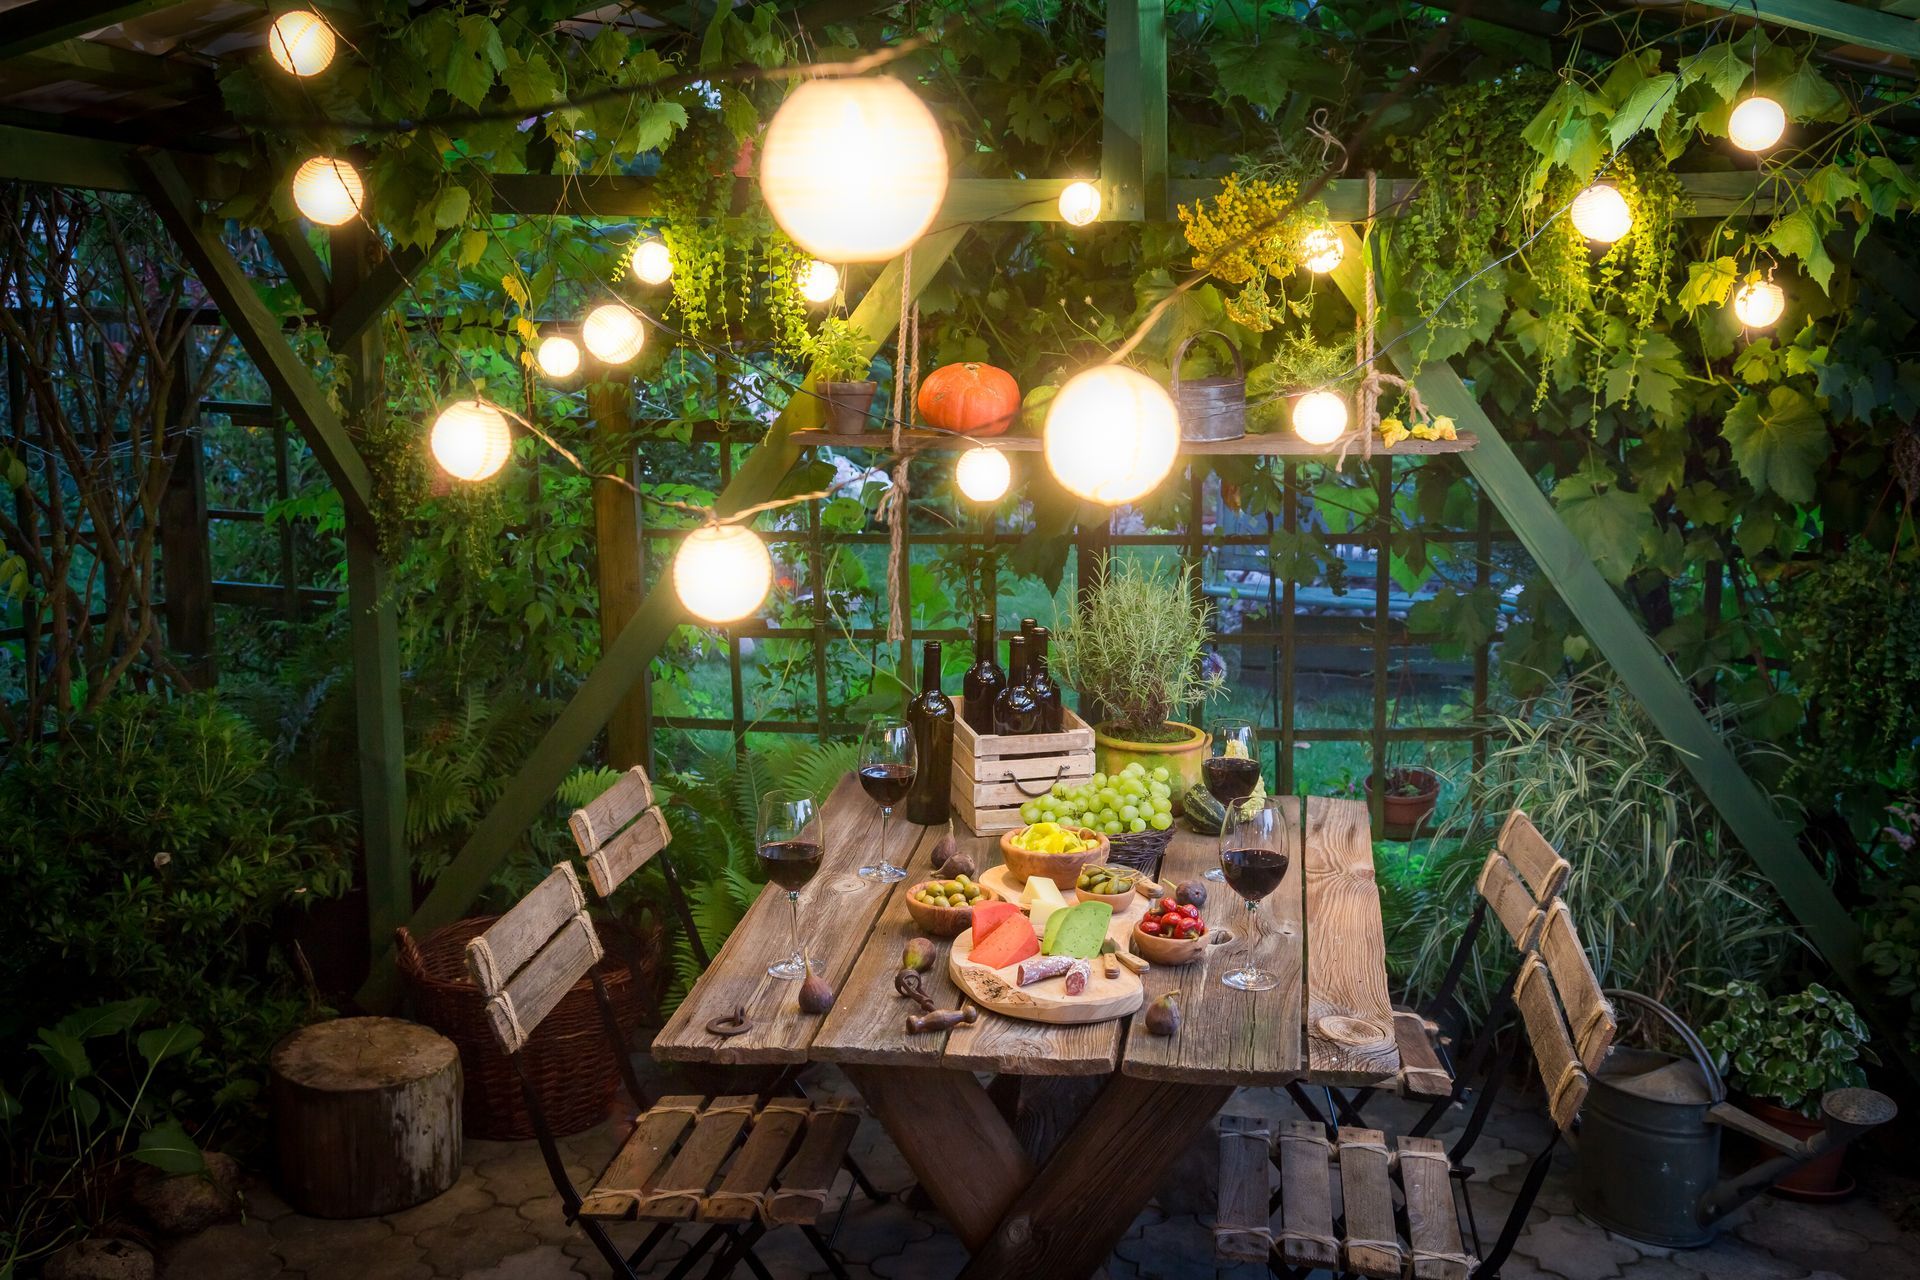 Preparation for dinner with cheese, red wine in the evening with a beautiful lights for a romantic ambiance